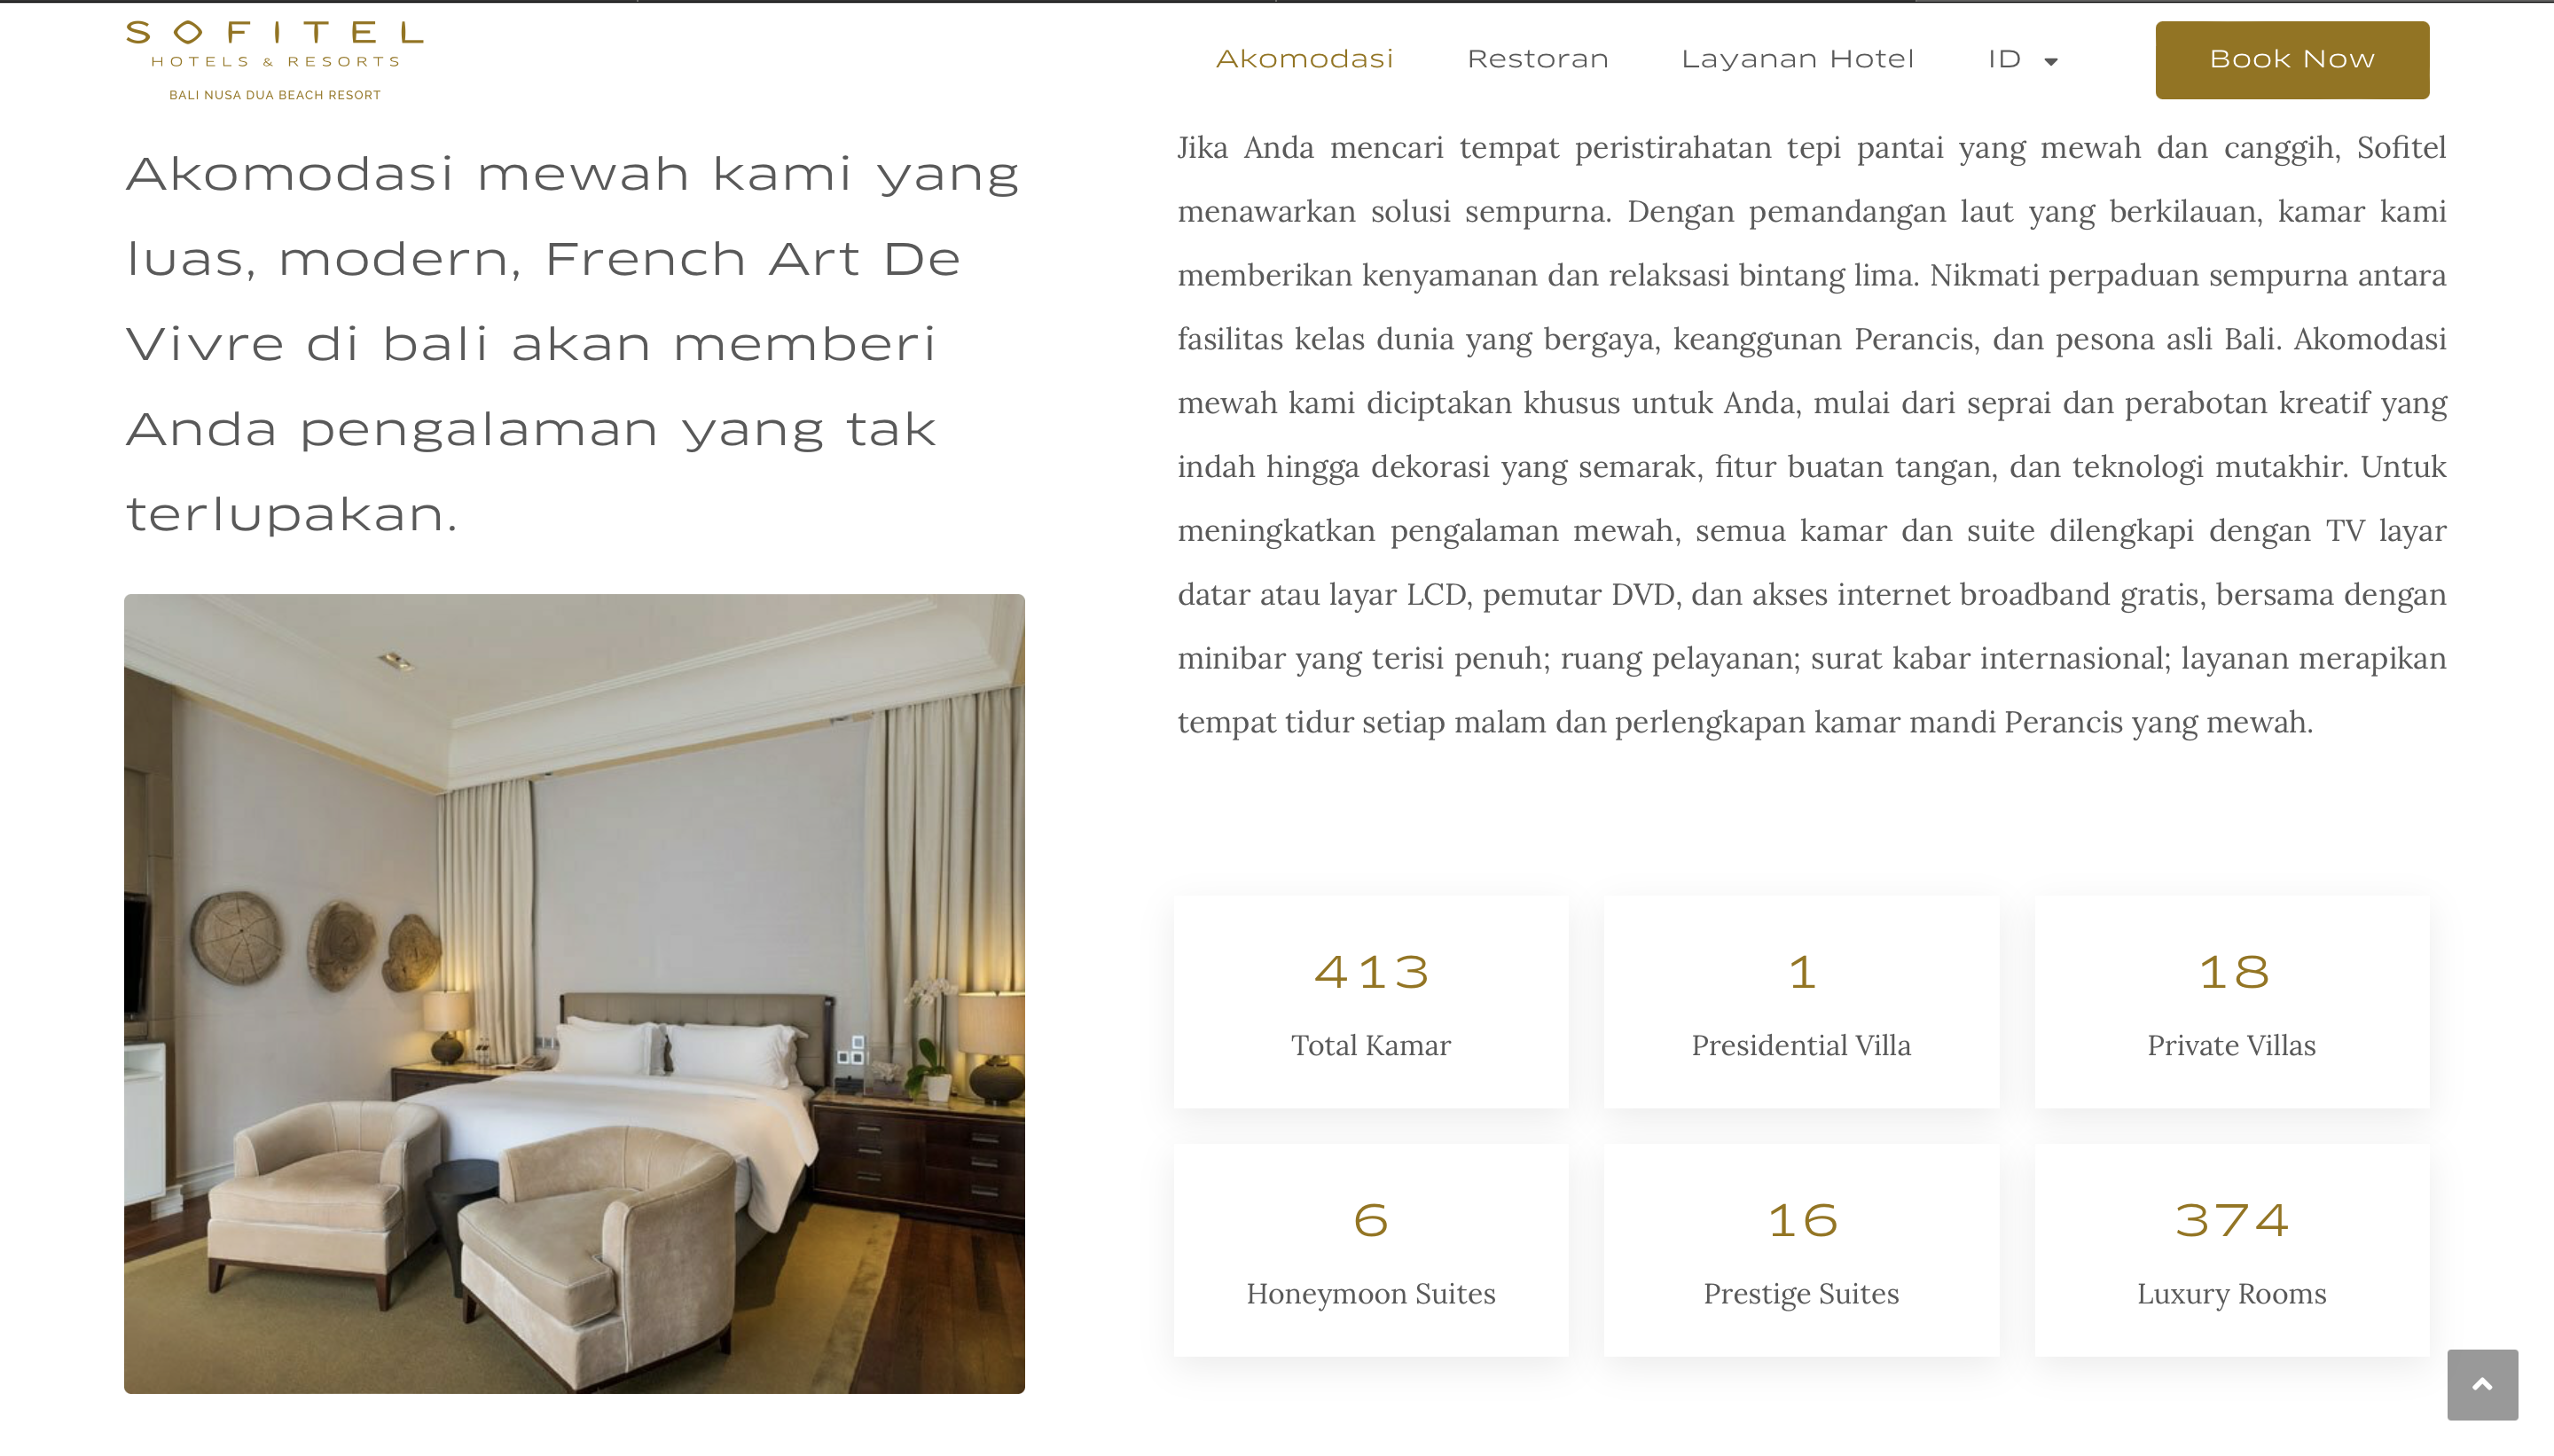 The Display of Sofitel accommodation page by SATUVISION